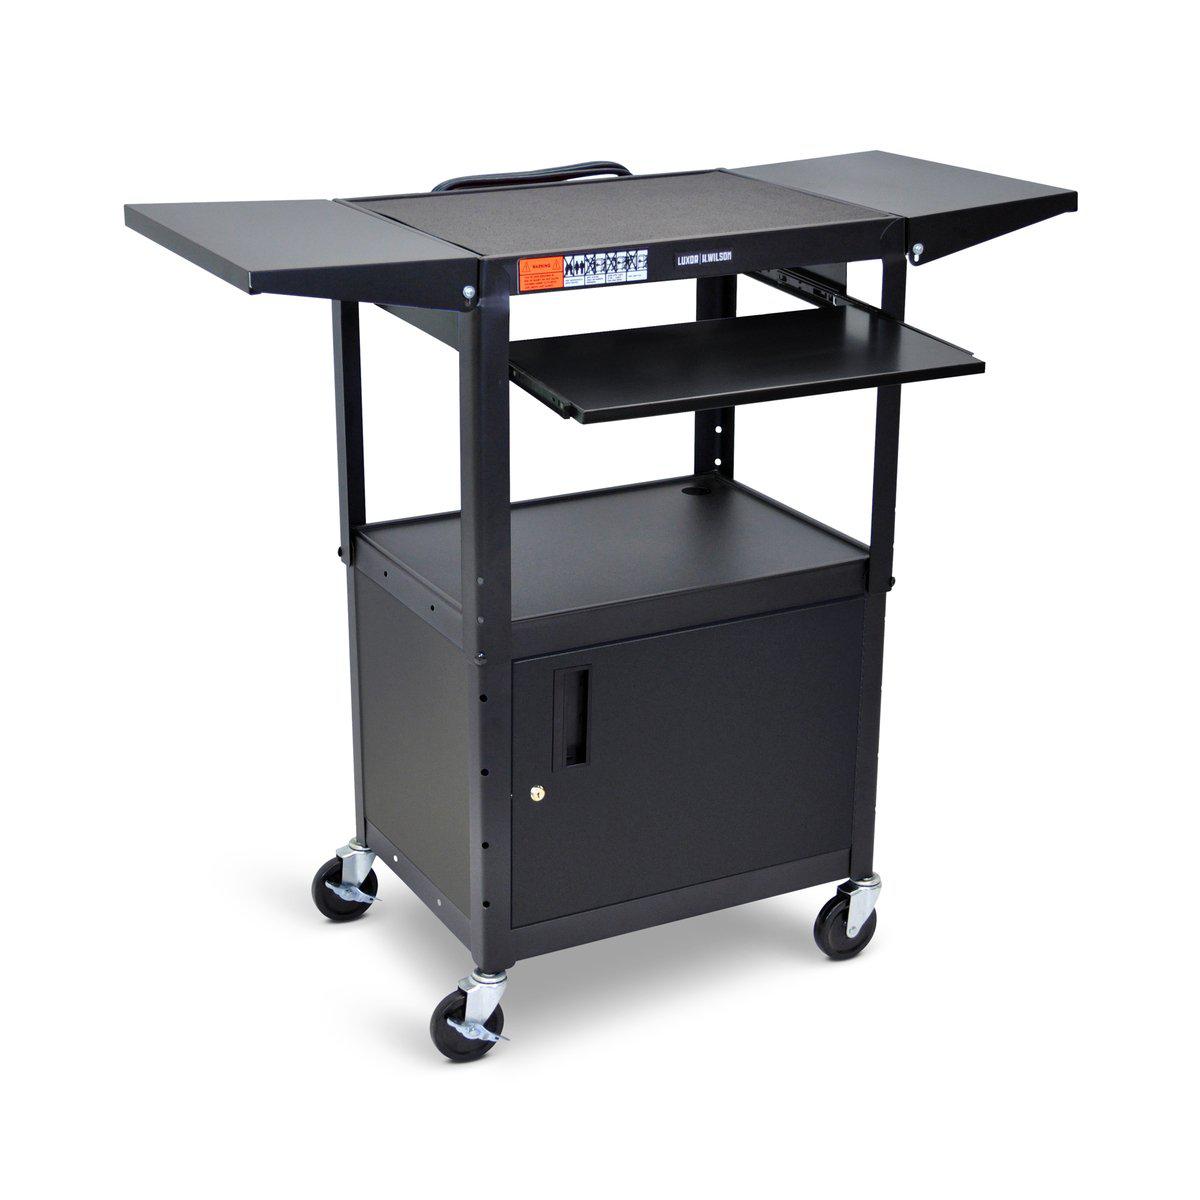 Adjustable-Height Steel AV Cart with Pullout Keyboard Tray, Cabinet and Drop Leaf Shelves